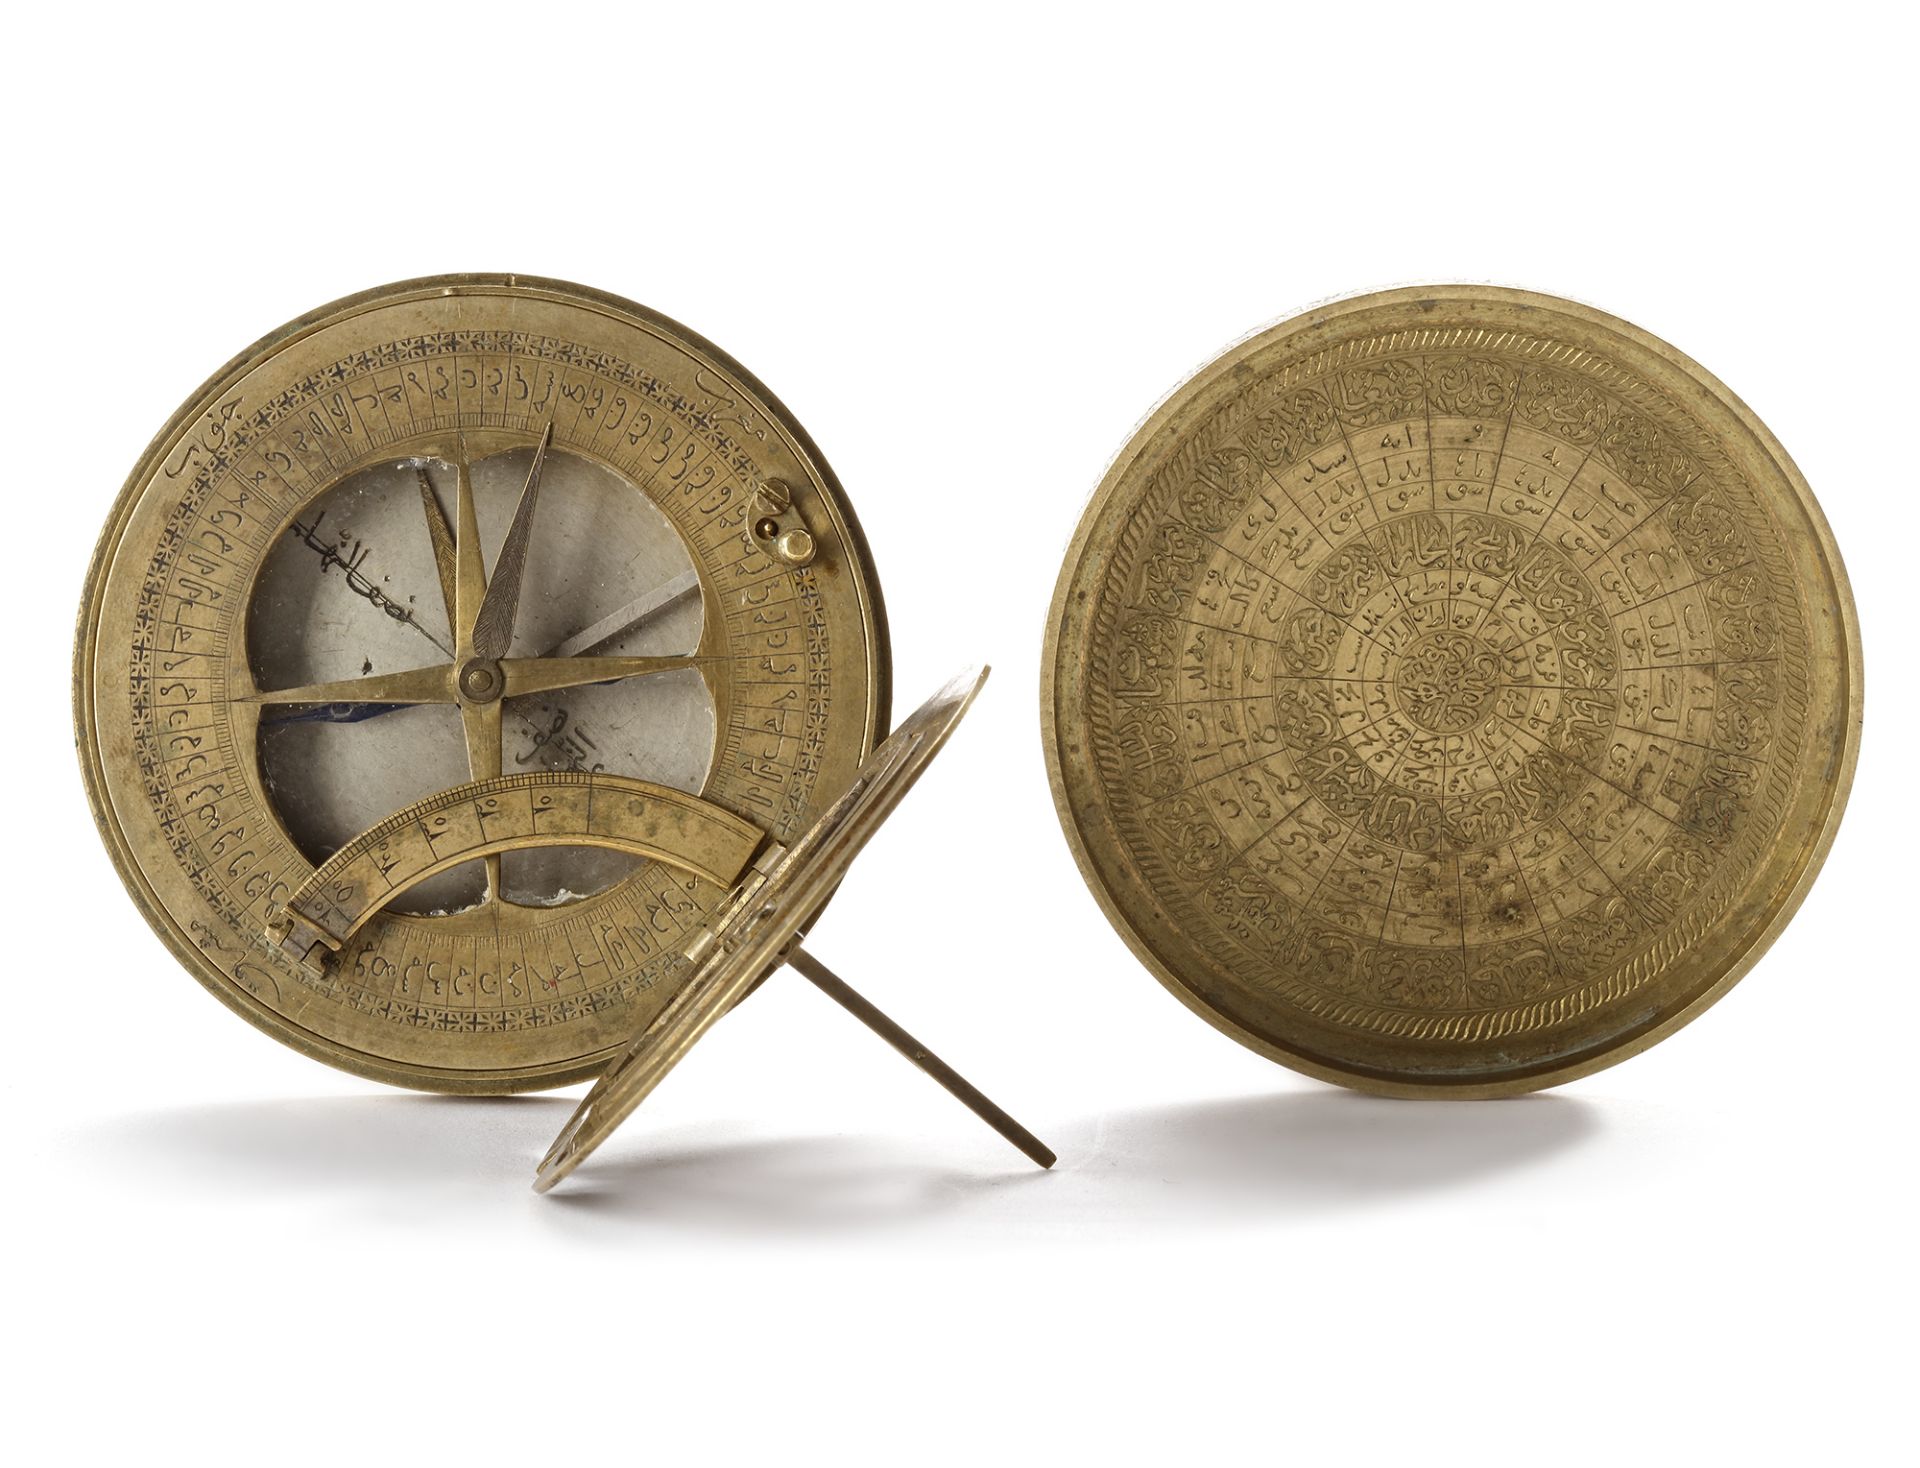 A RARE PERSIAN QIBLA FINDER FITTED WITH A EUROPEAN STYLE "UNIVERSAL" SUNDIAL, 18TH CENTURY - Image 8 of 9